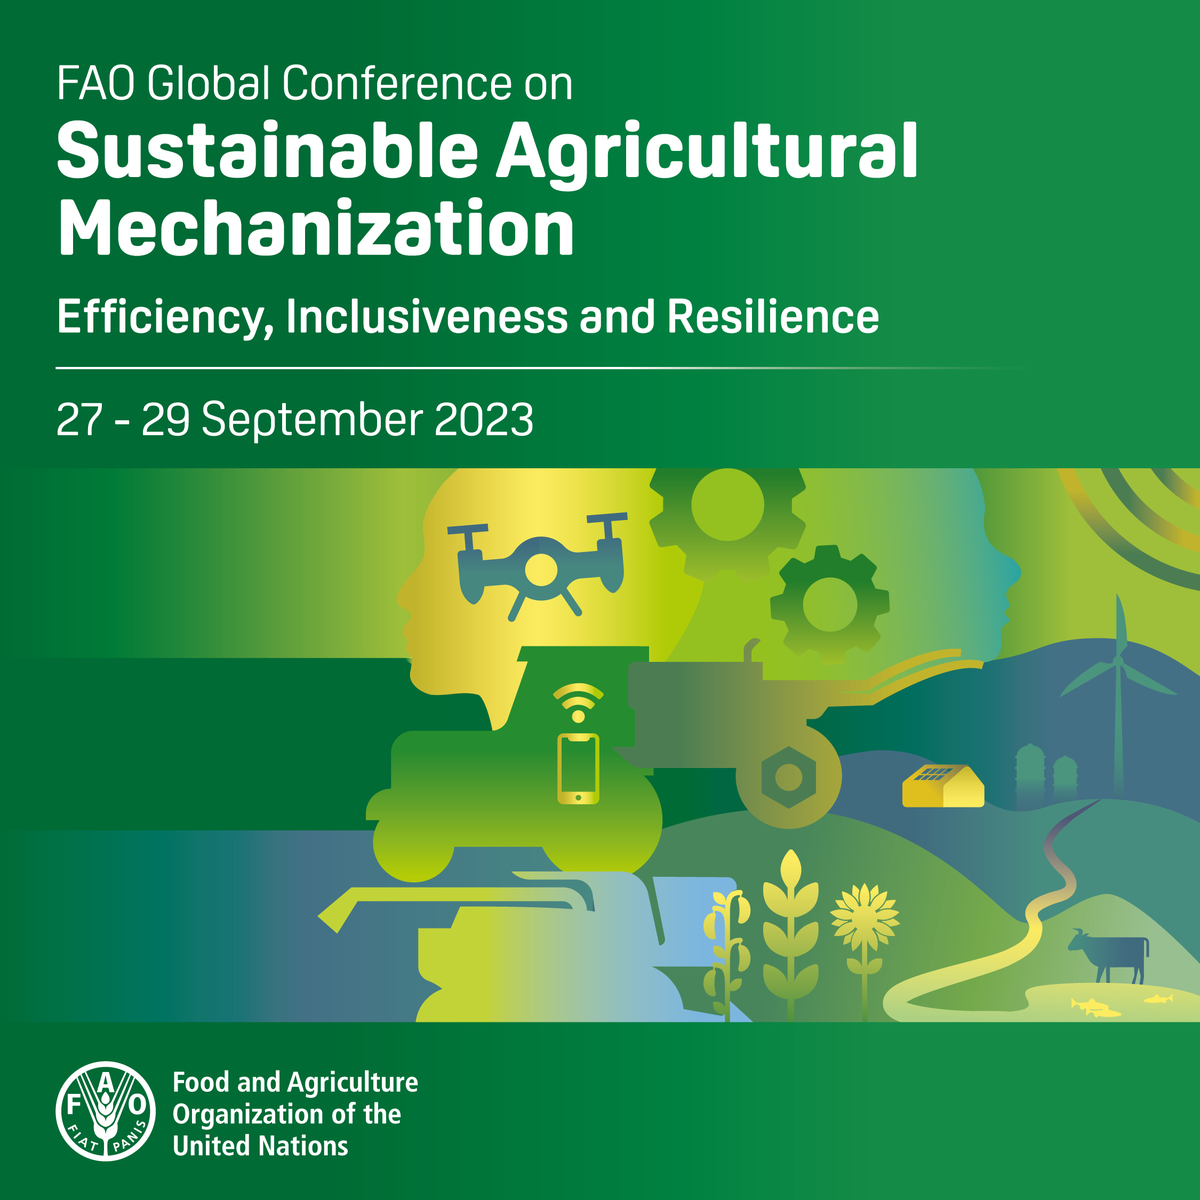 #DYK that sustainable #AgriculturalMechanization can help: 🥗 Reduce food and water loss 🌱 Minimize negative impacts on soil heath 🙋 Engage youth in business models for mechanization services Register here 👉 bit.ly/3NE8tqE #AgInnovation